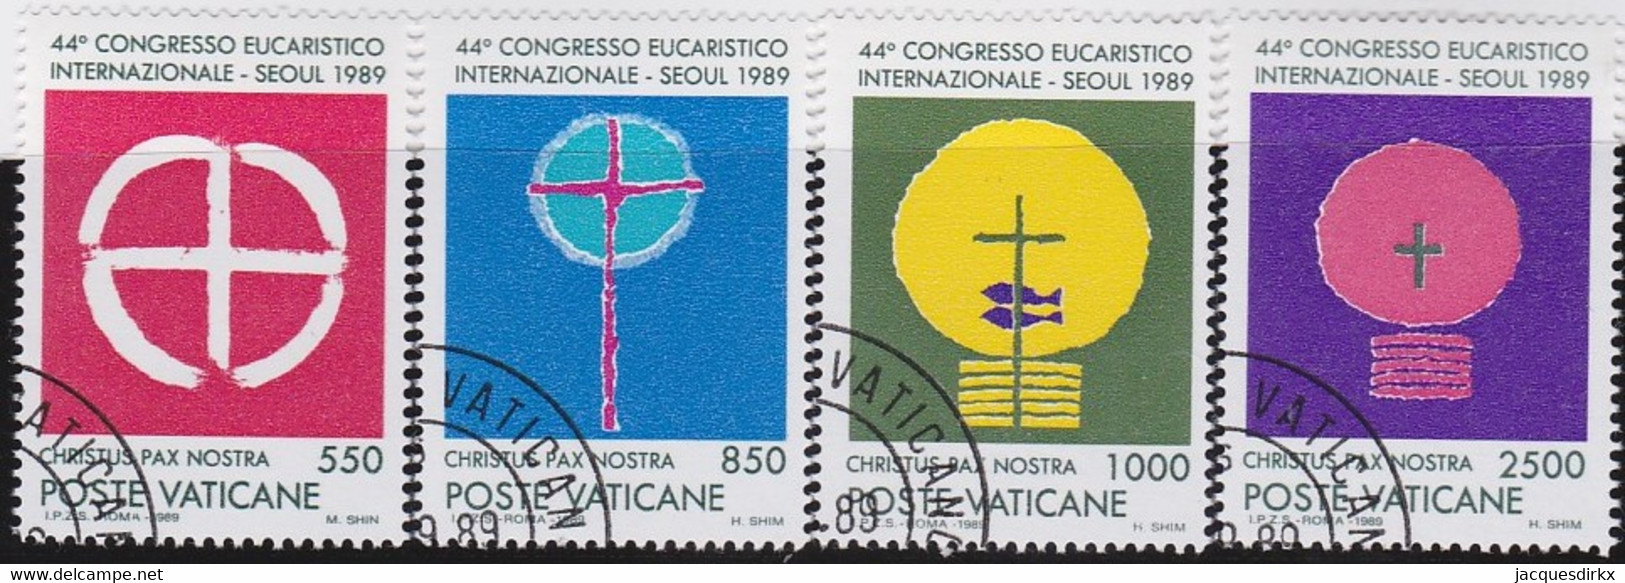 Vatican   .   Y&T   .    860/863    .      O     .    Cancelled  .   /   .  Oblitéré - Used Stamps